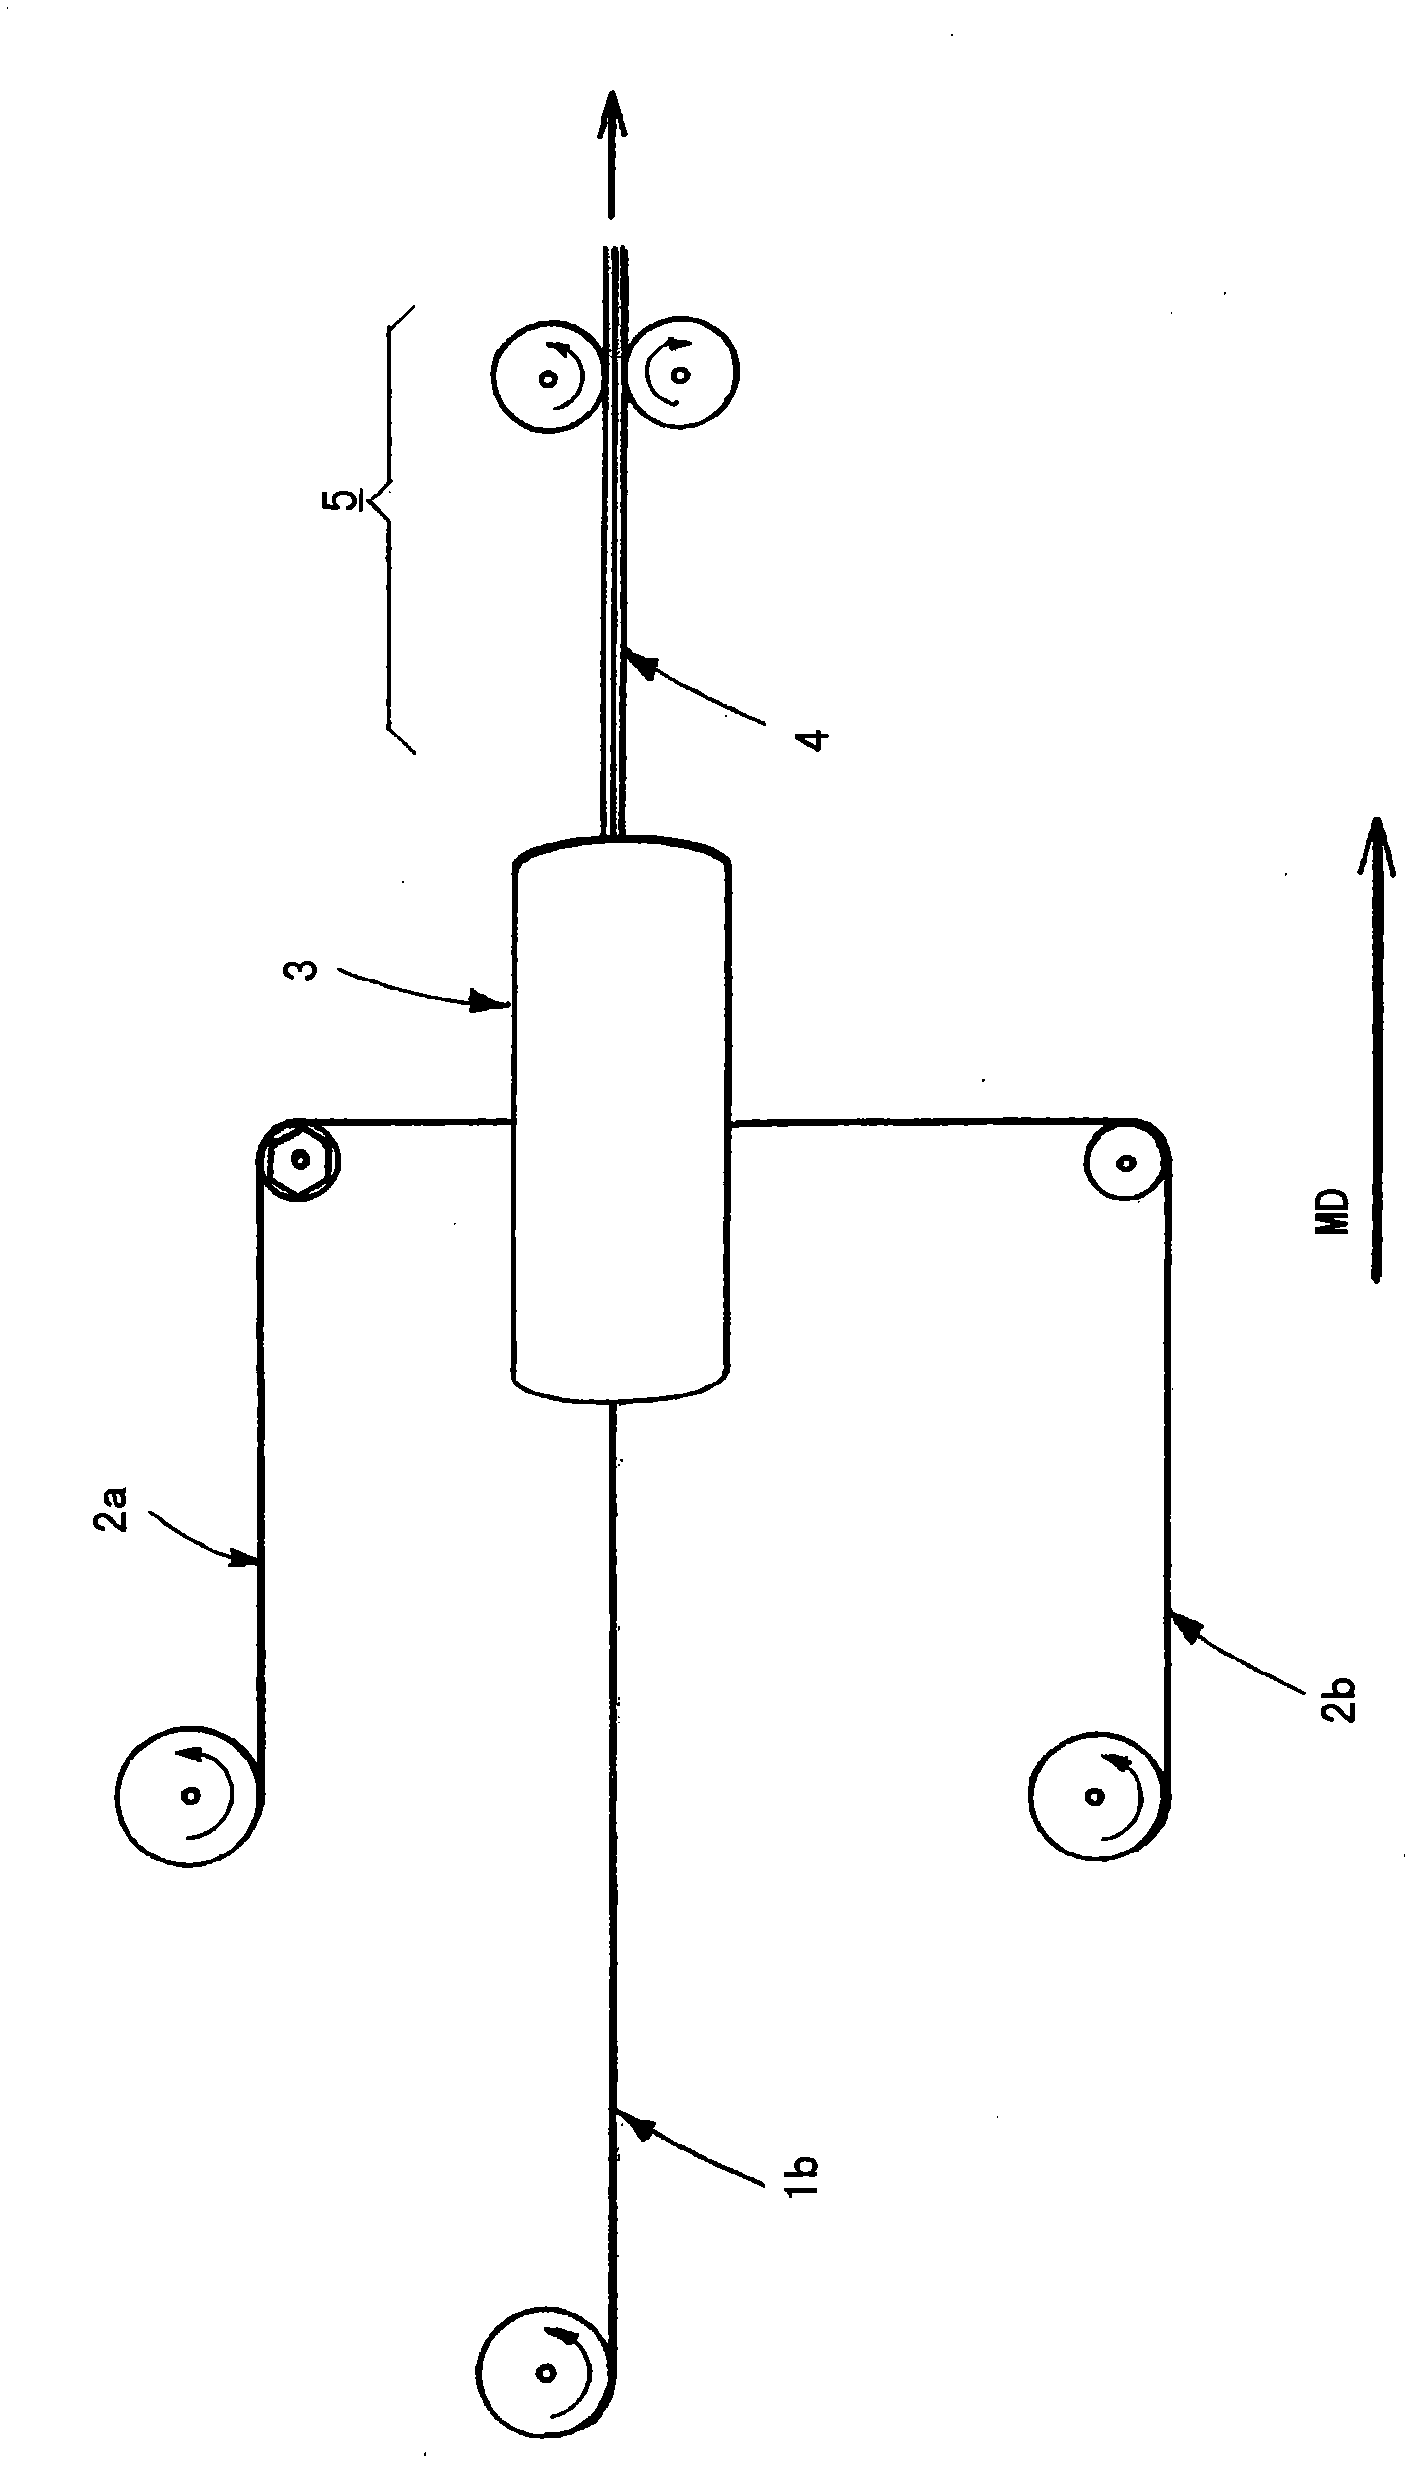 Method for producing pant-type articles having a chassis structure and pant-type articles produced according to the method